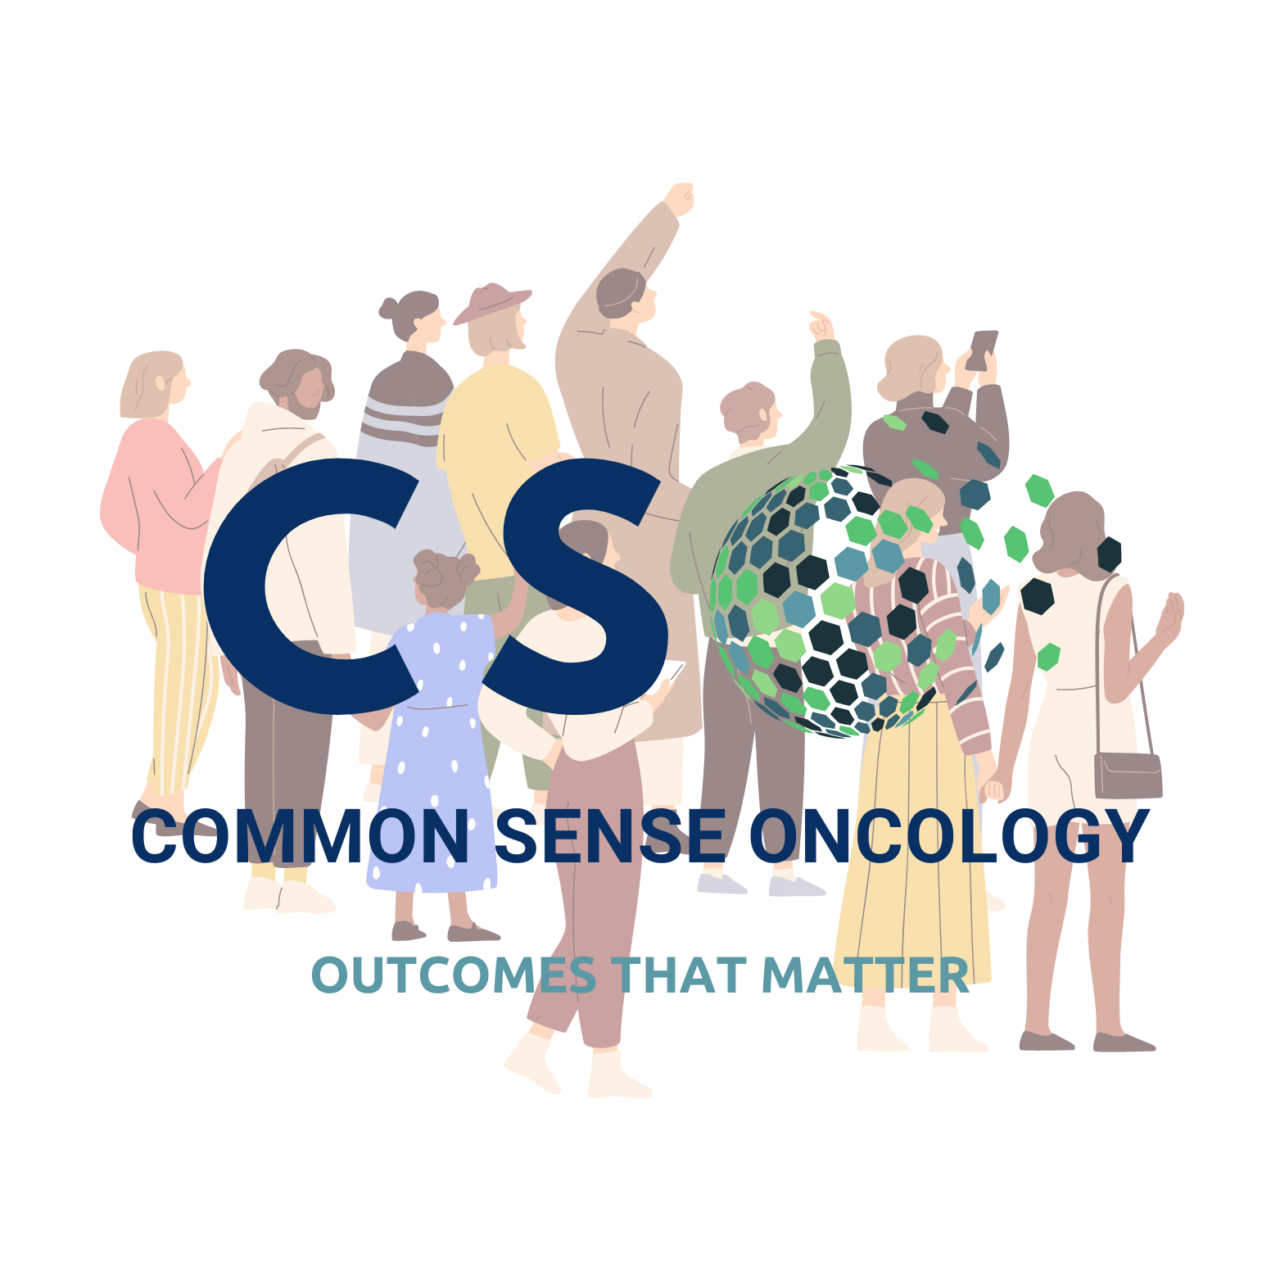 Sunday is the deadline to apply for our CSO program manager position – Common Sense Oncology